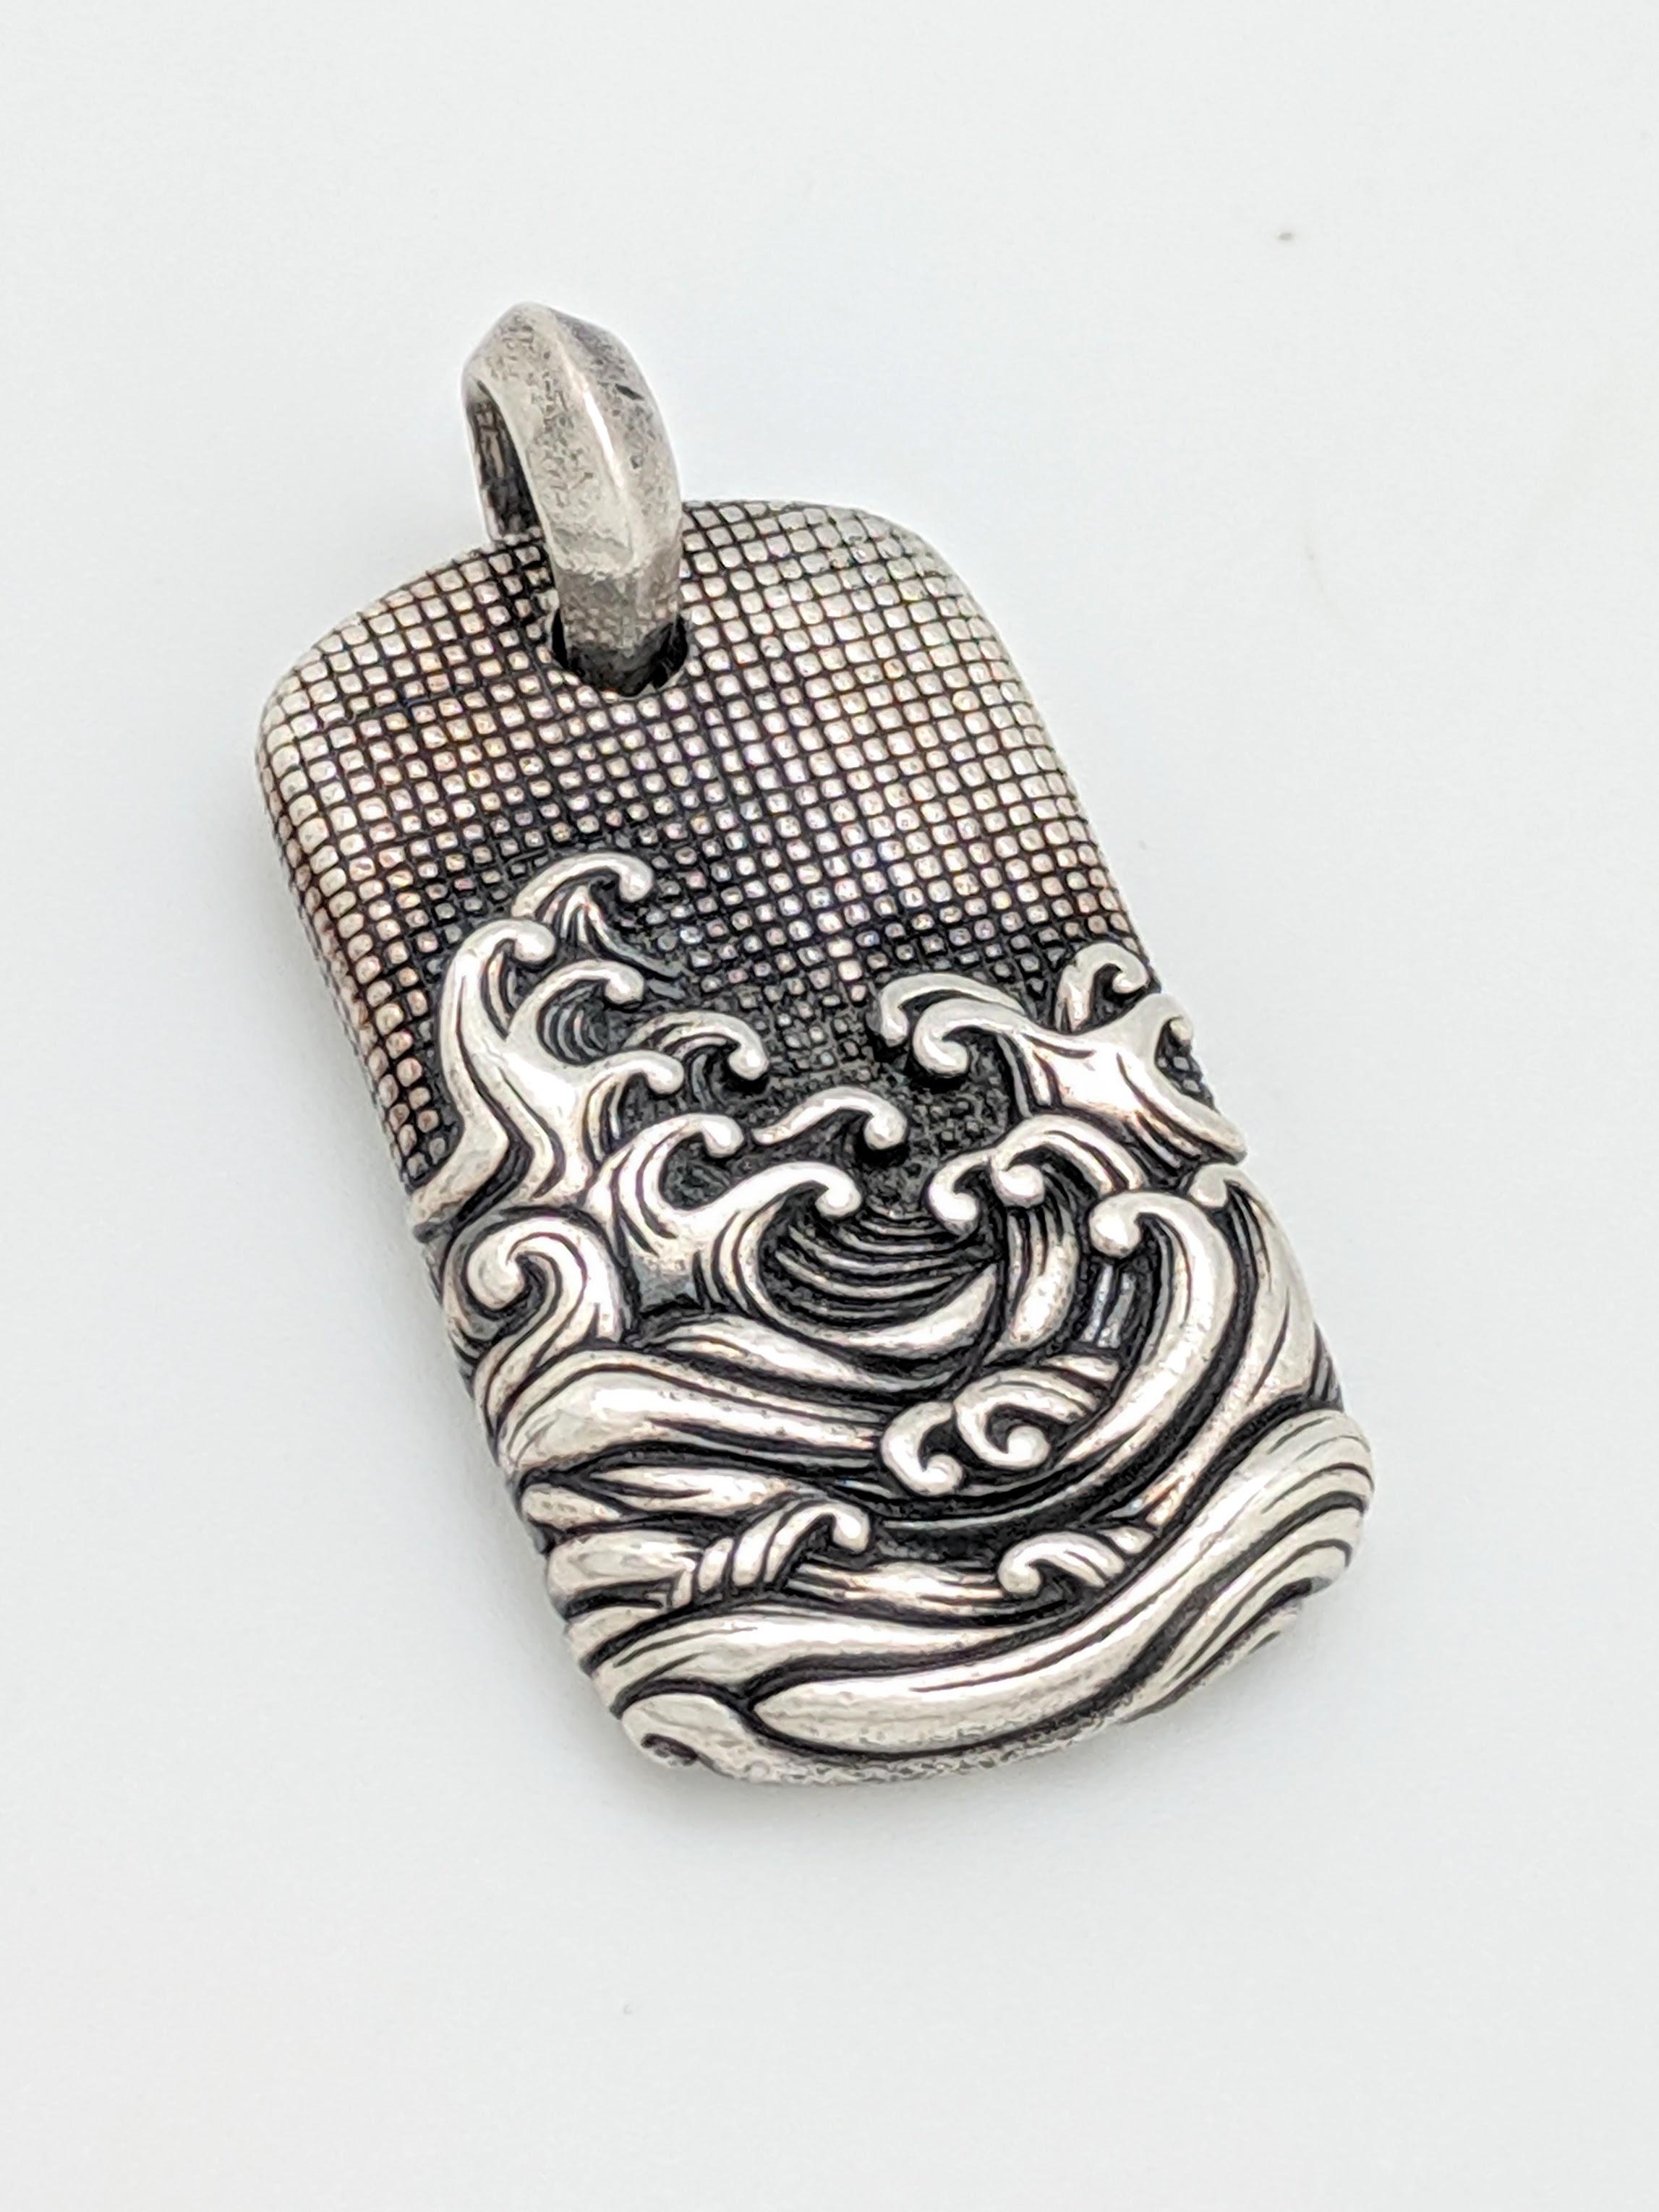 Men's David Yurman Wave Tag Pendant

You are viewing an Authentic David Yurman Wave Tag Pendant.

    Sterling silver
    32.5 x 20mm (not including bail)
    20.6 Grams

This pendant is previously owned and comes to you in great condition.